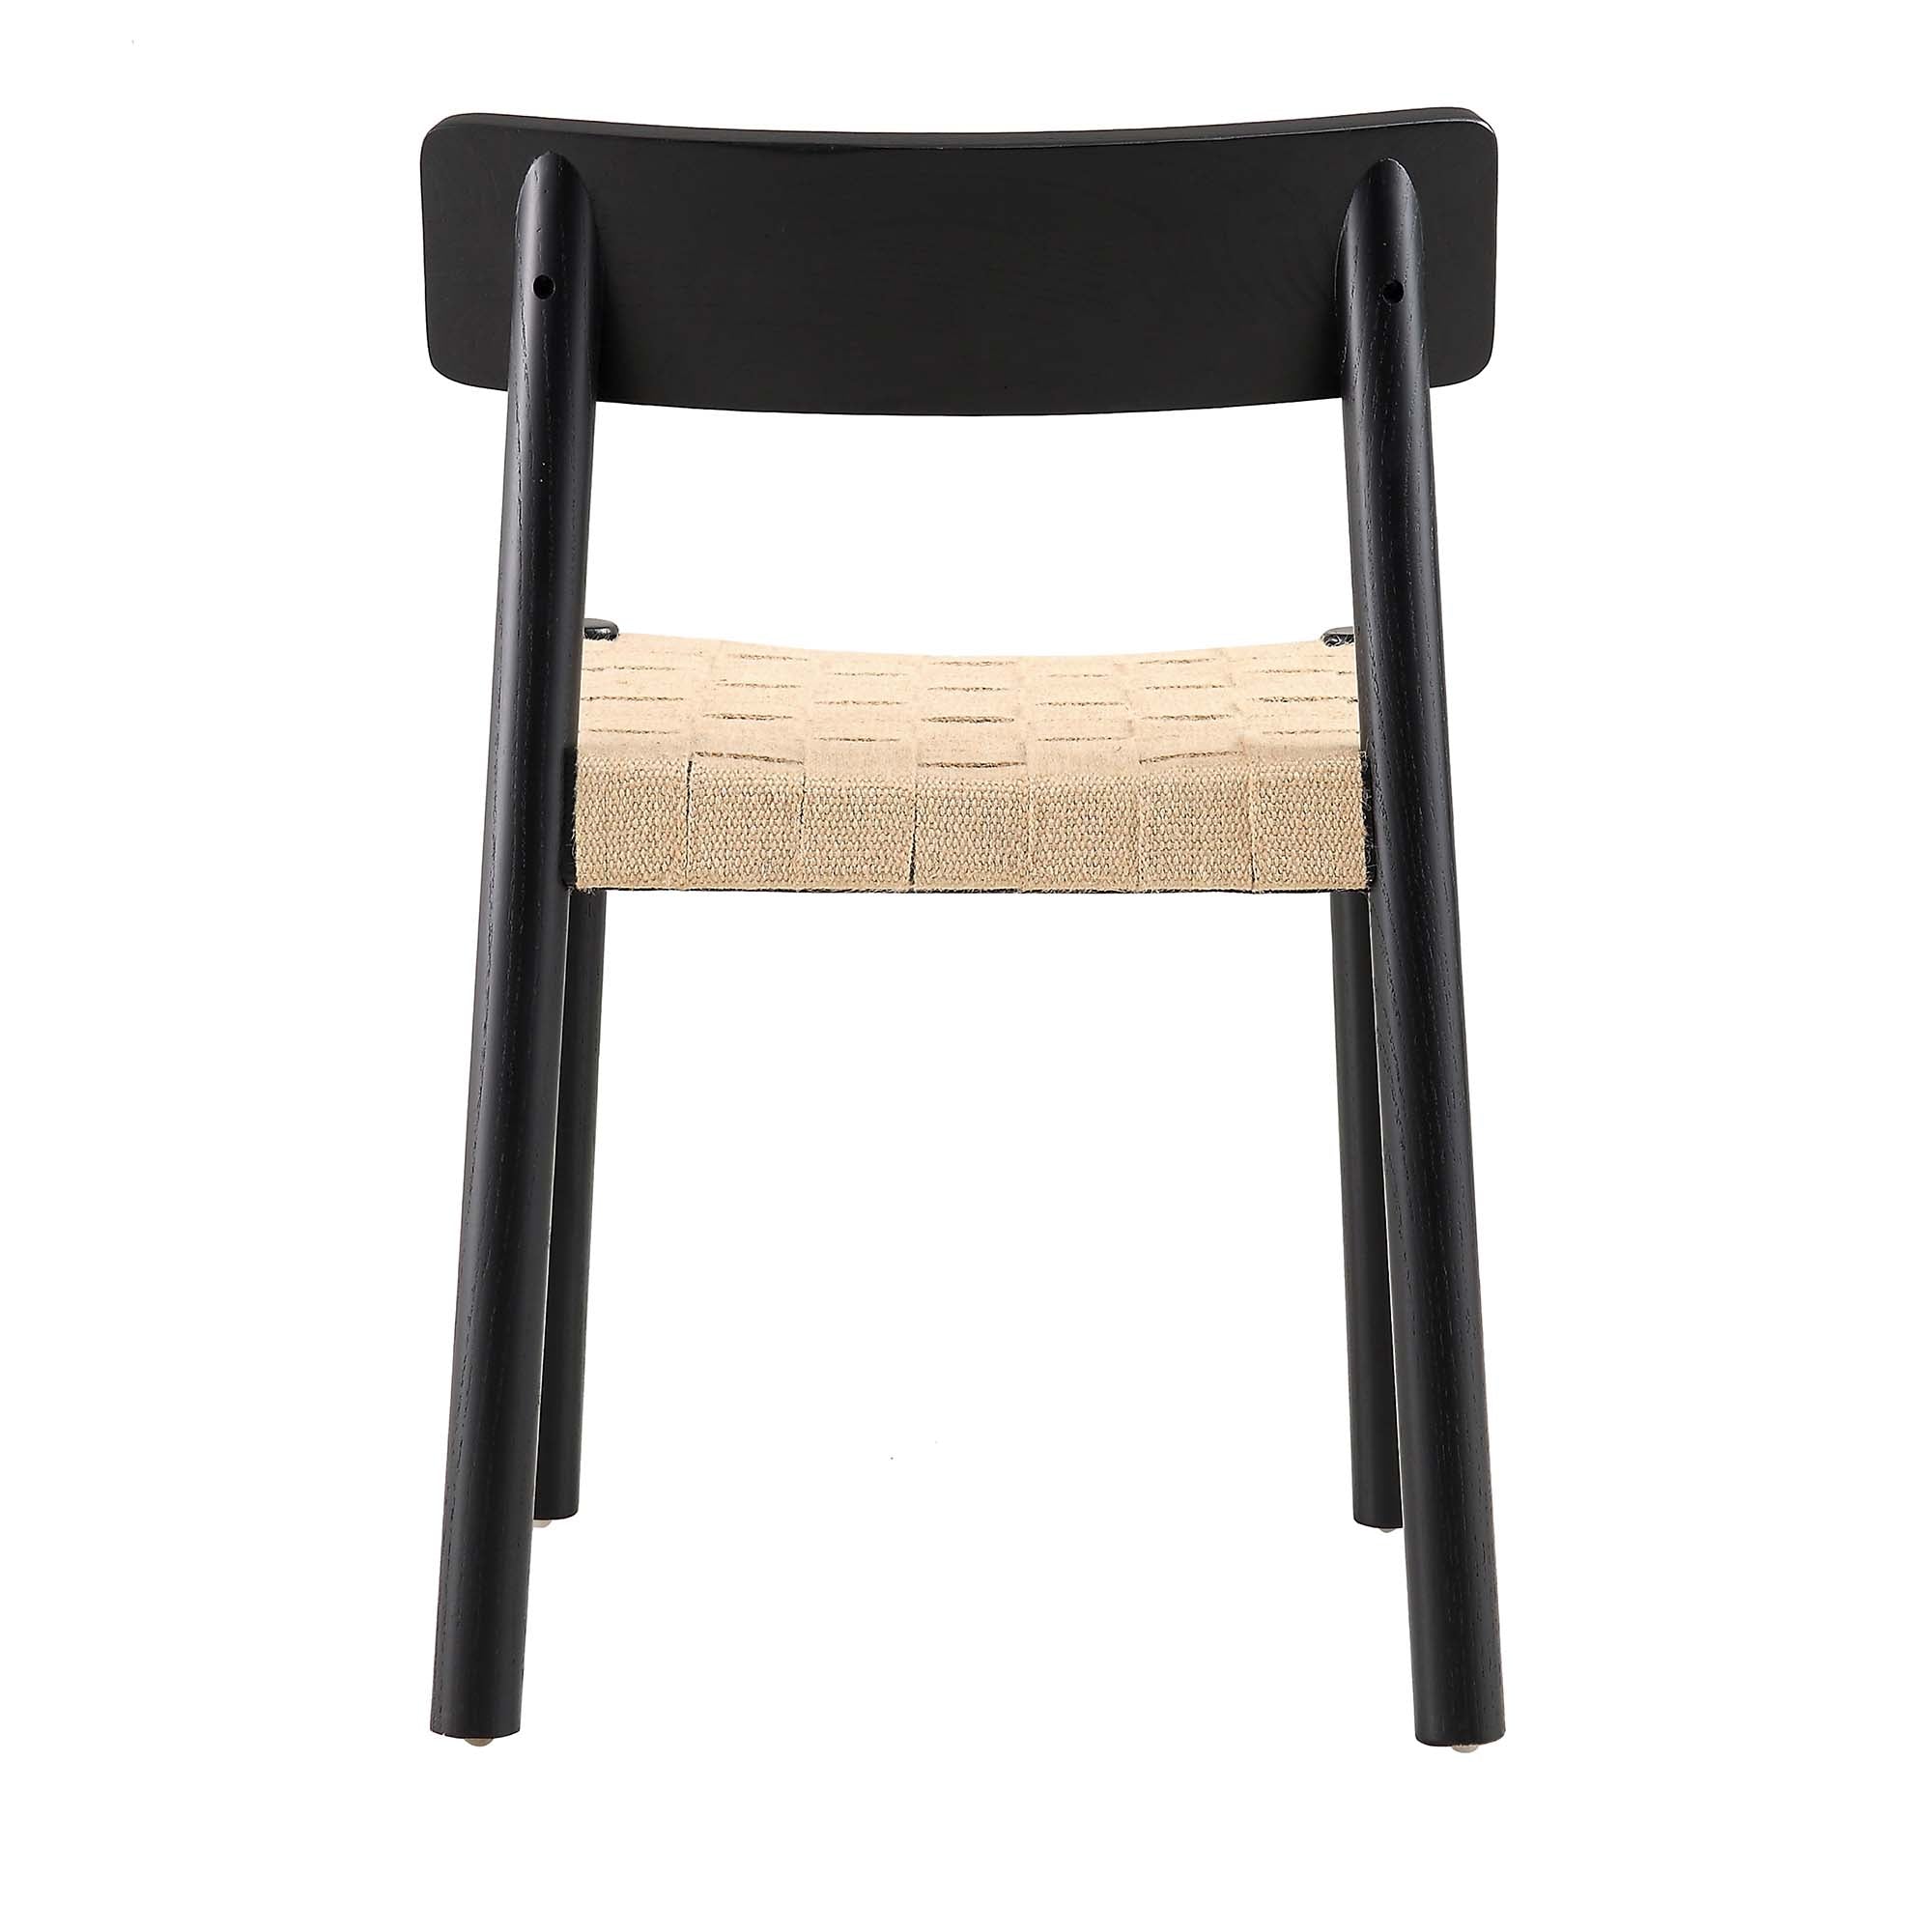 Ditton Set of 2 Elm Wood and Jute Dining Chairs, Black